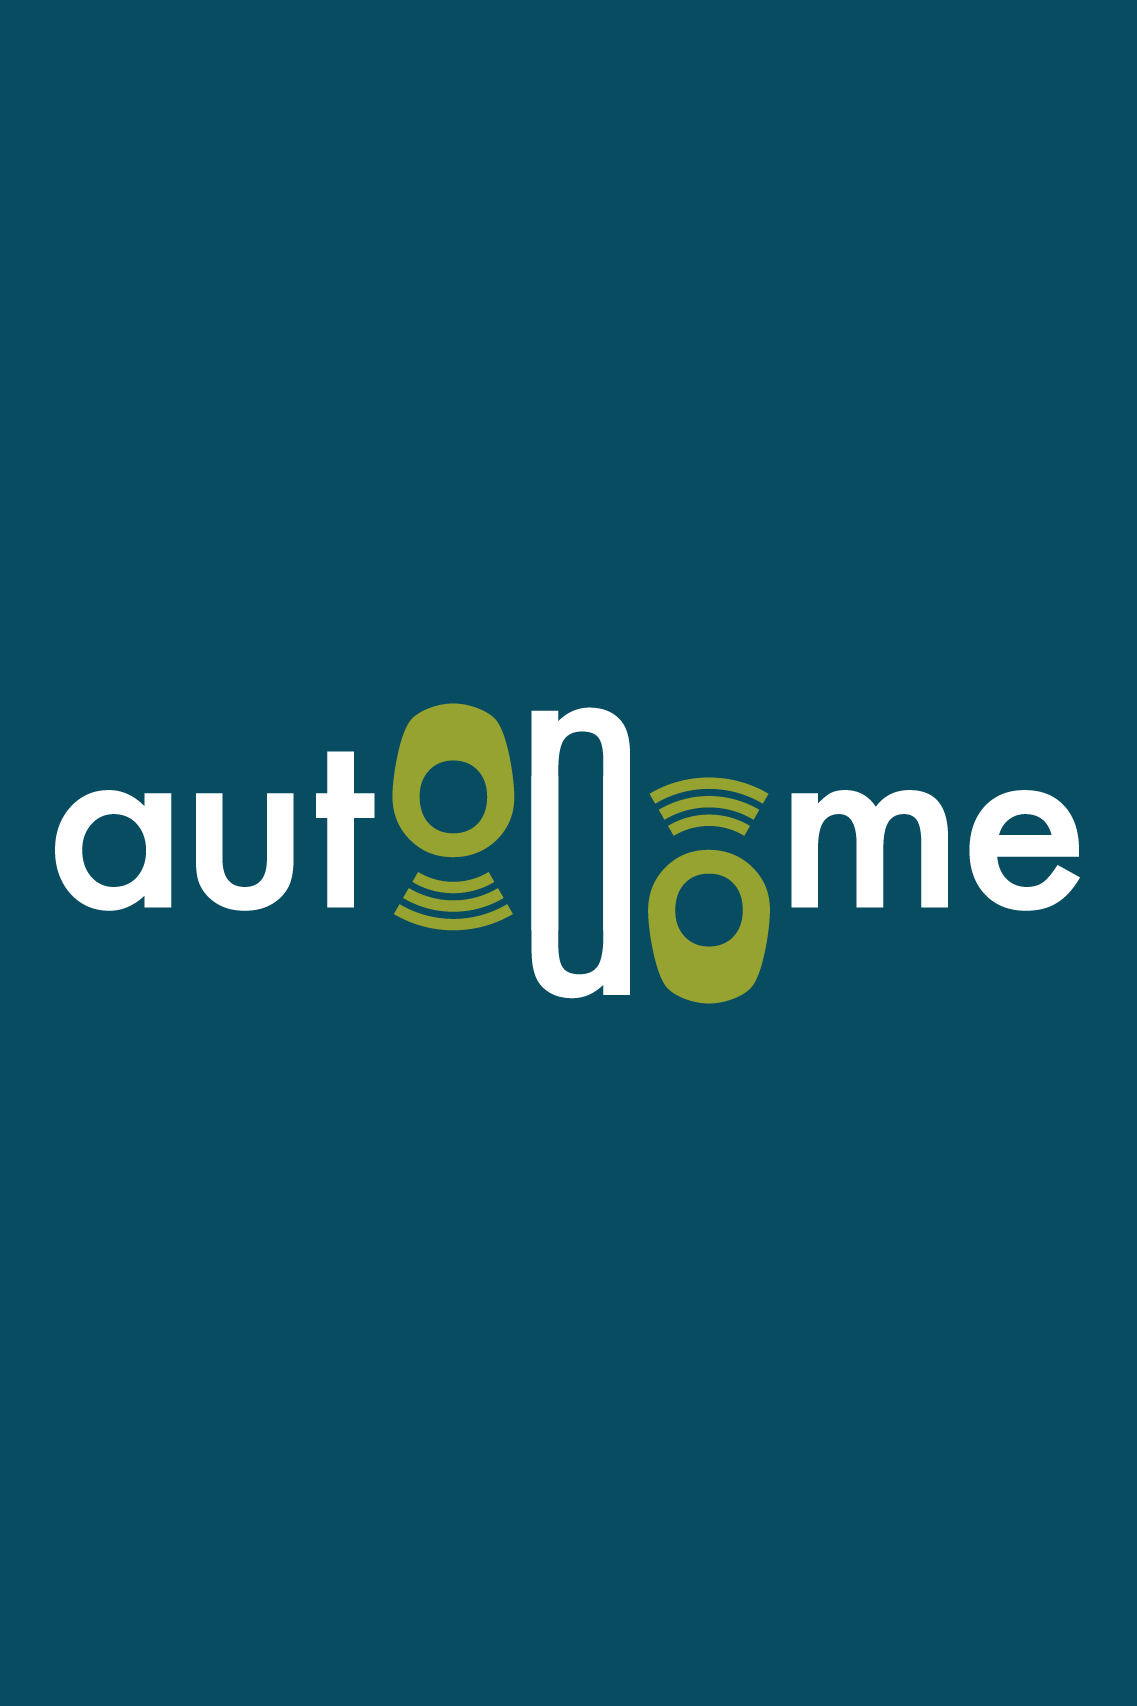 Daily logo challenge, day 5, Autonome driverless car company logo by Xavier Wendling